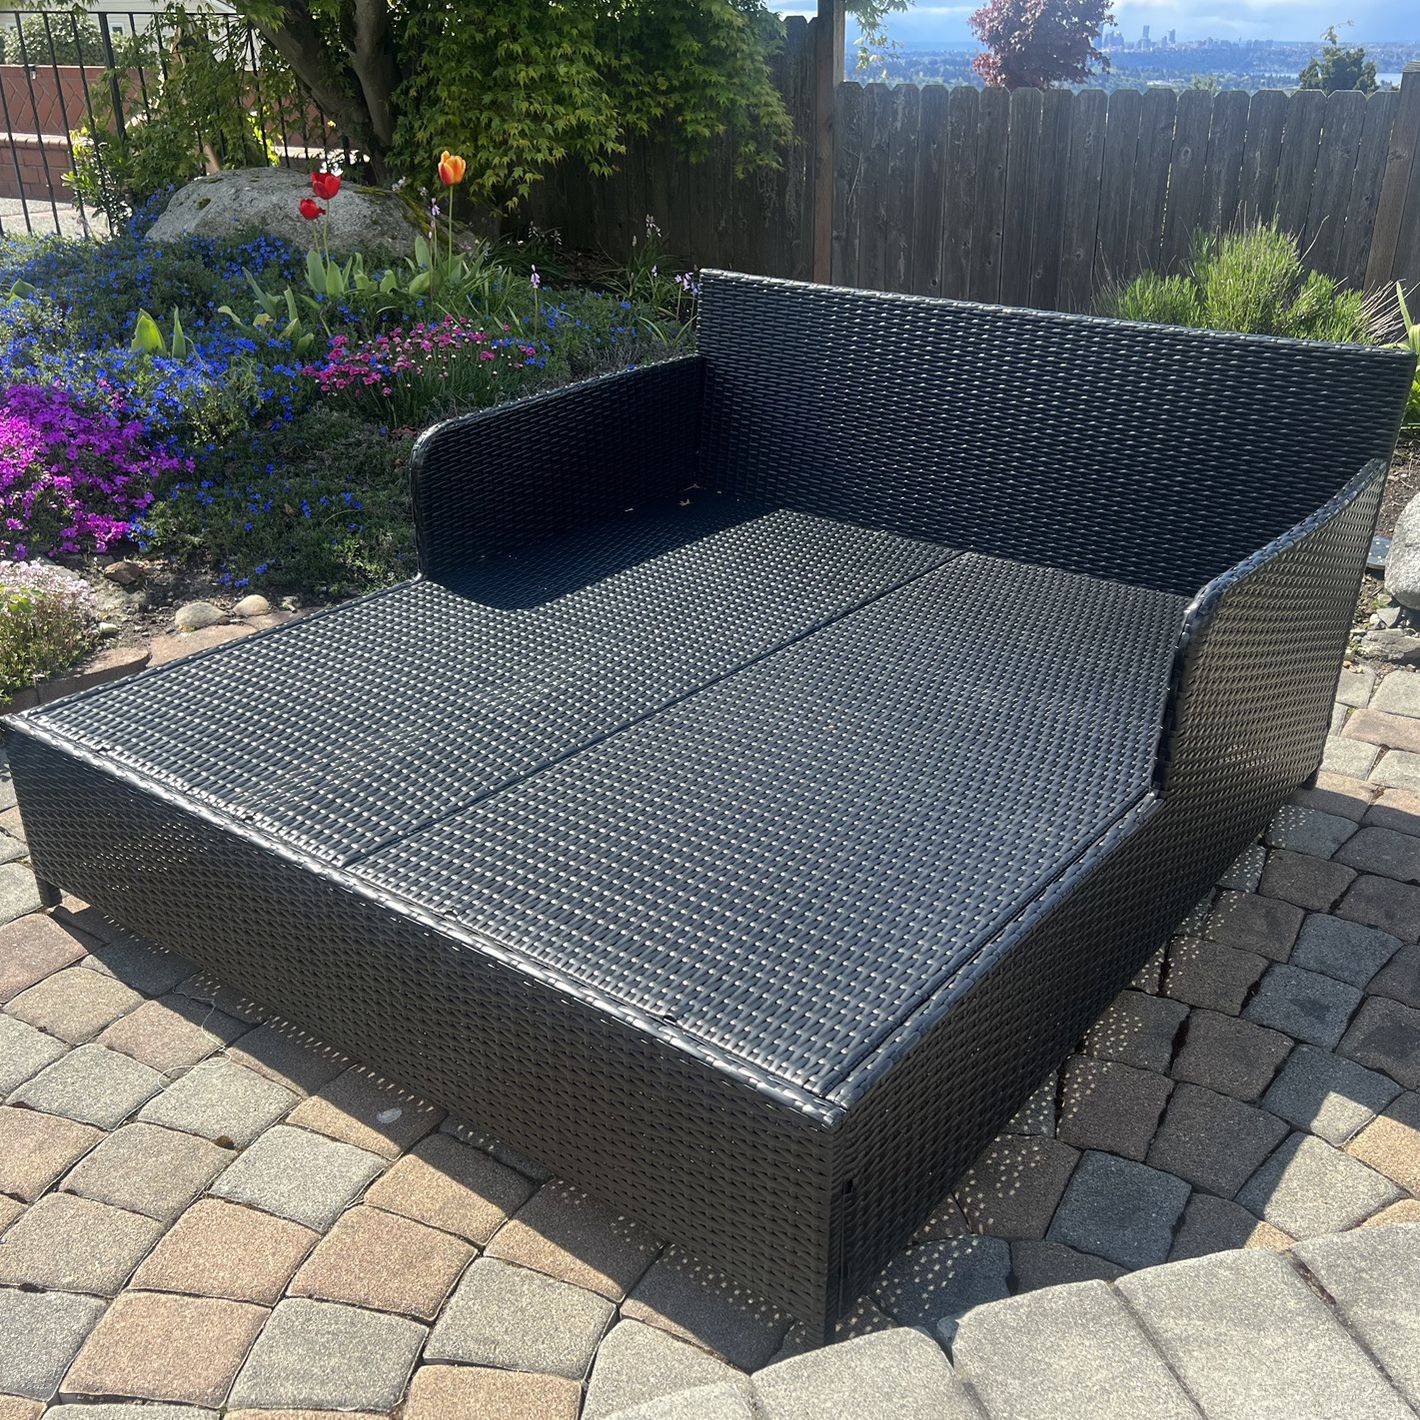 SAFAVIEH Outdoor Daybed Sofa w/ Cover - Black (no cushions)